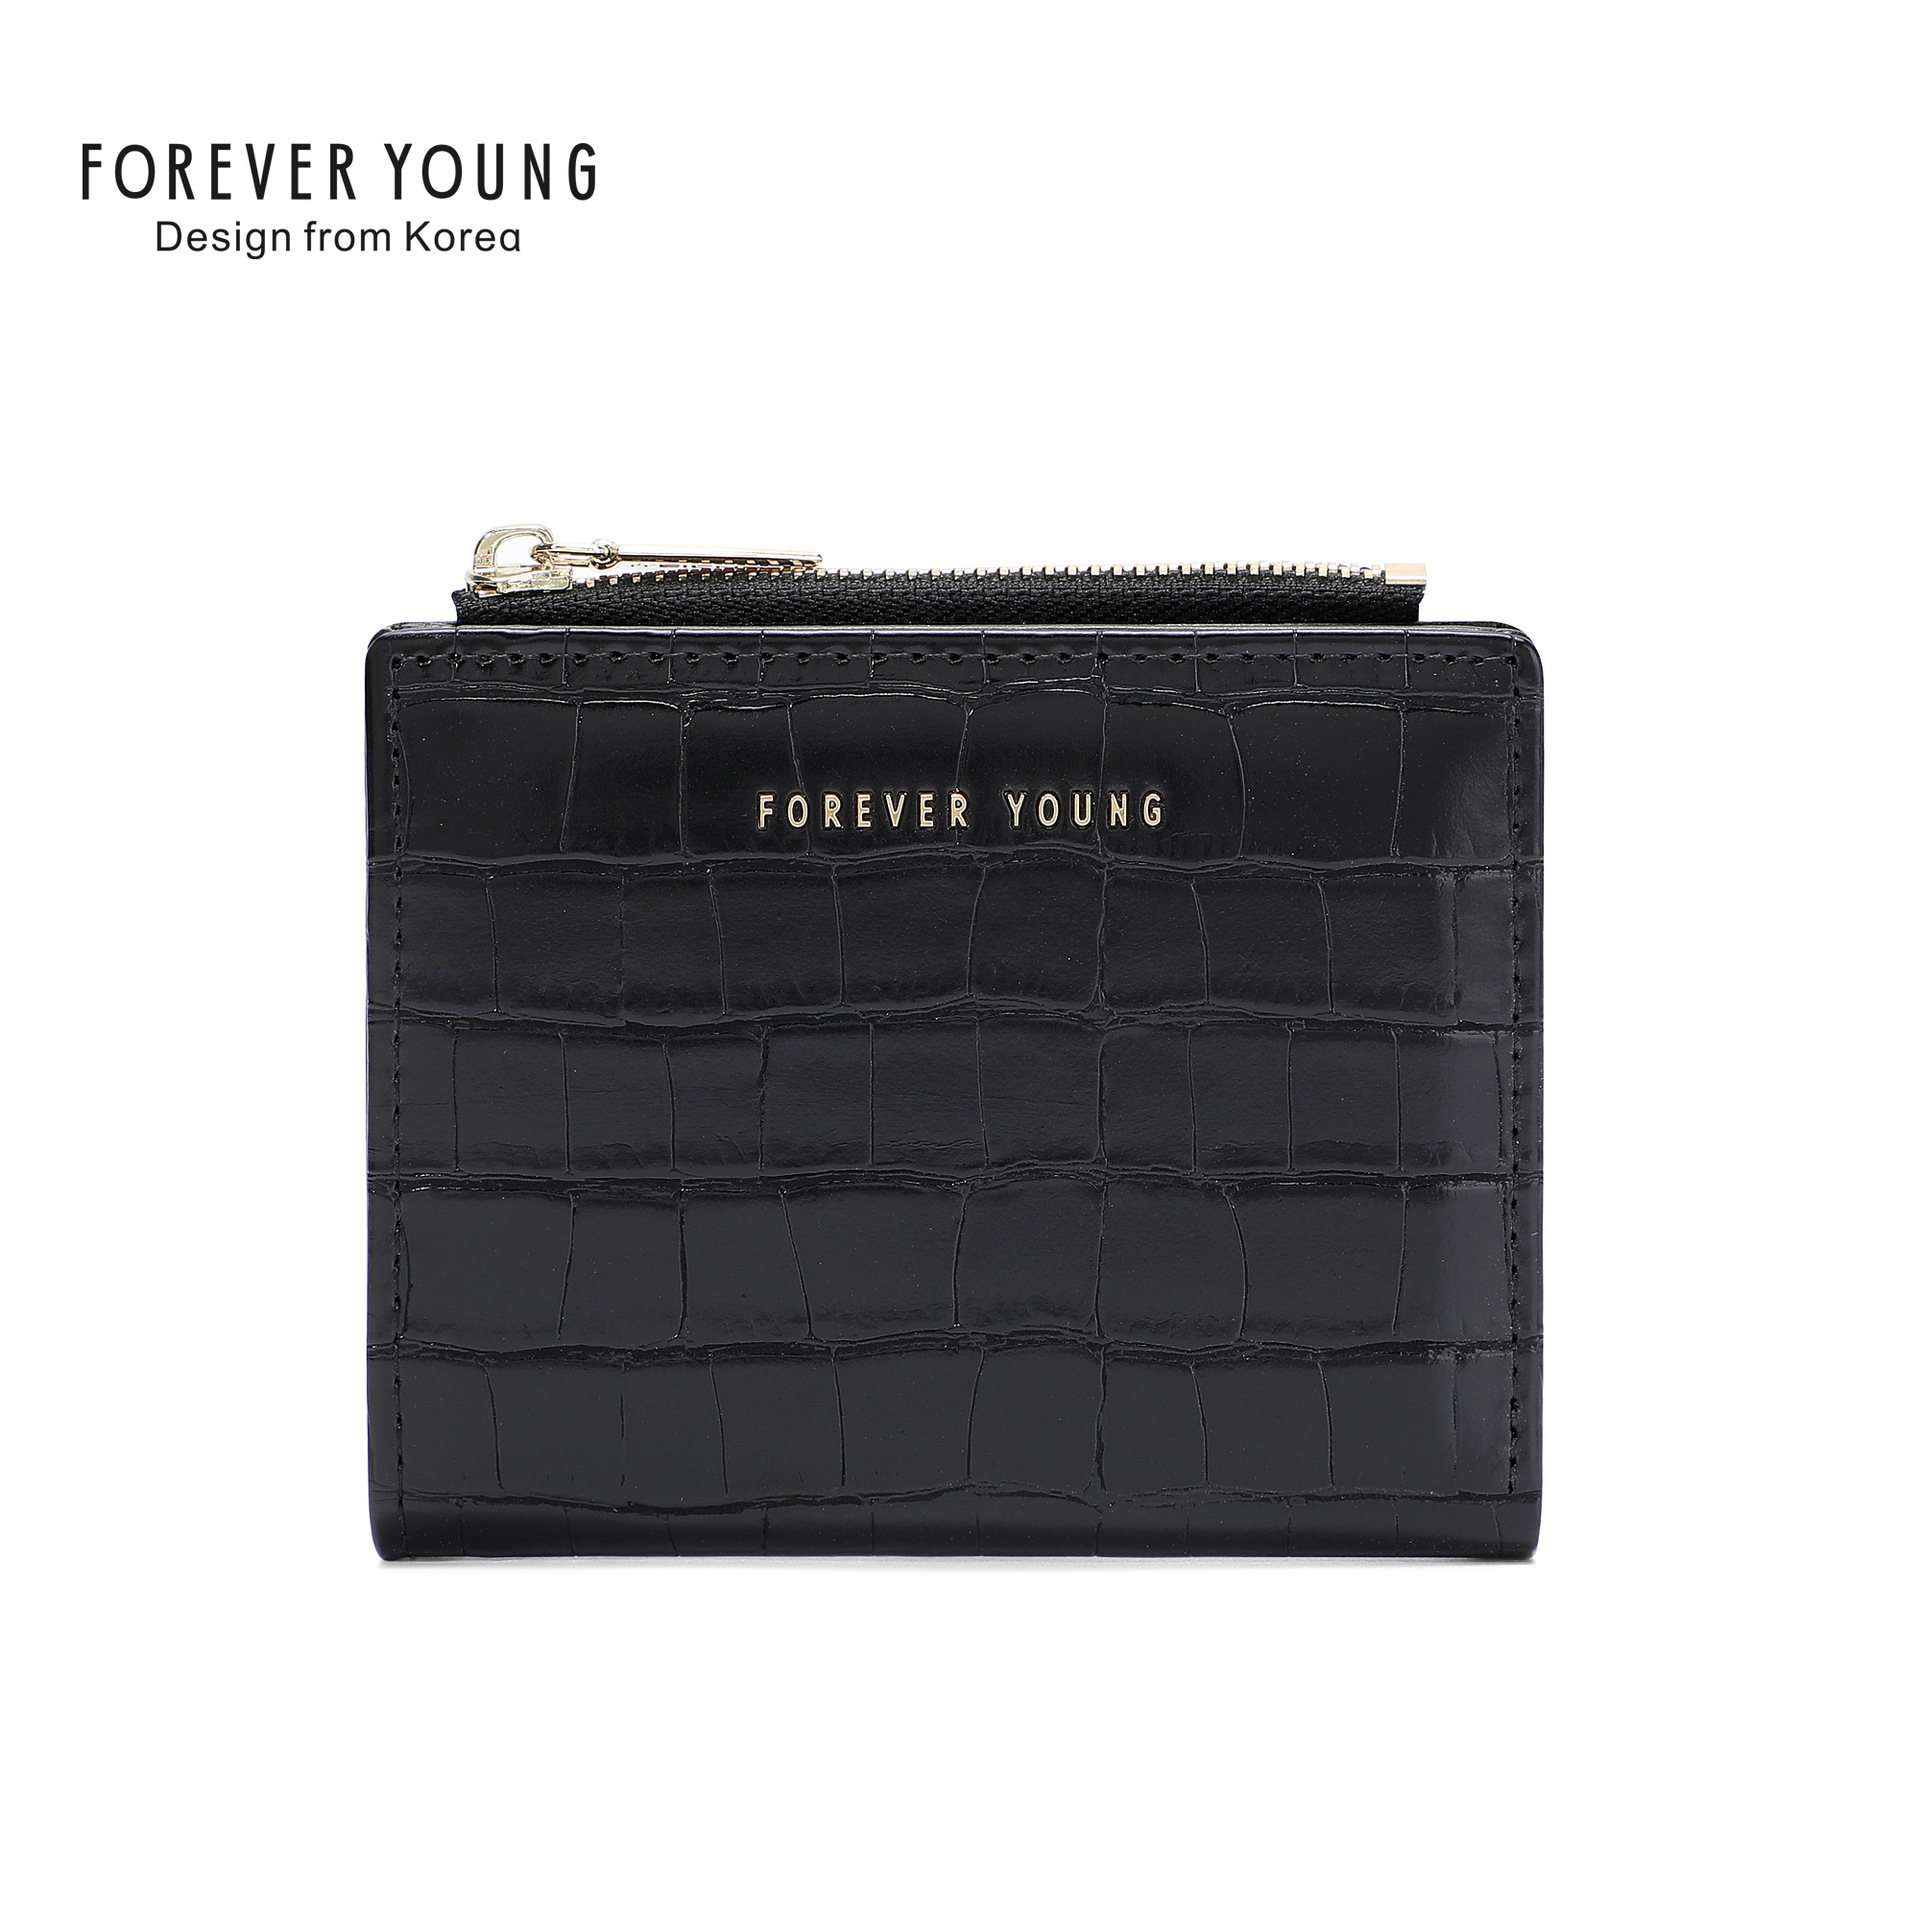 Forever Young Bag Wallet Women's Short Coin Purse Niche Women Bag Wholesale Simple Ultra-Thin Card Holder